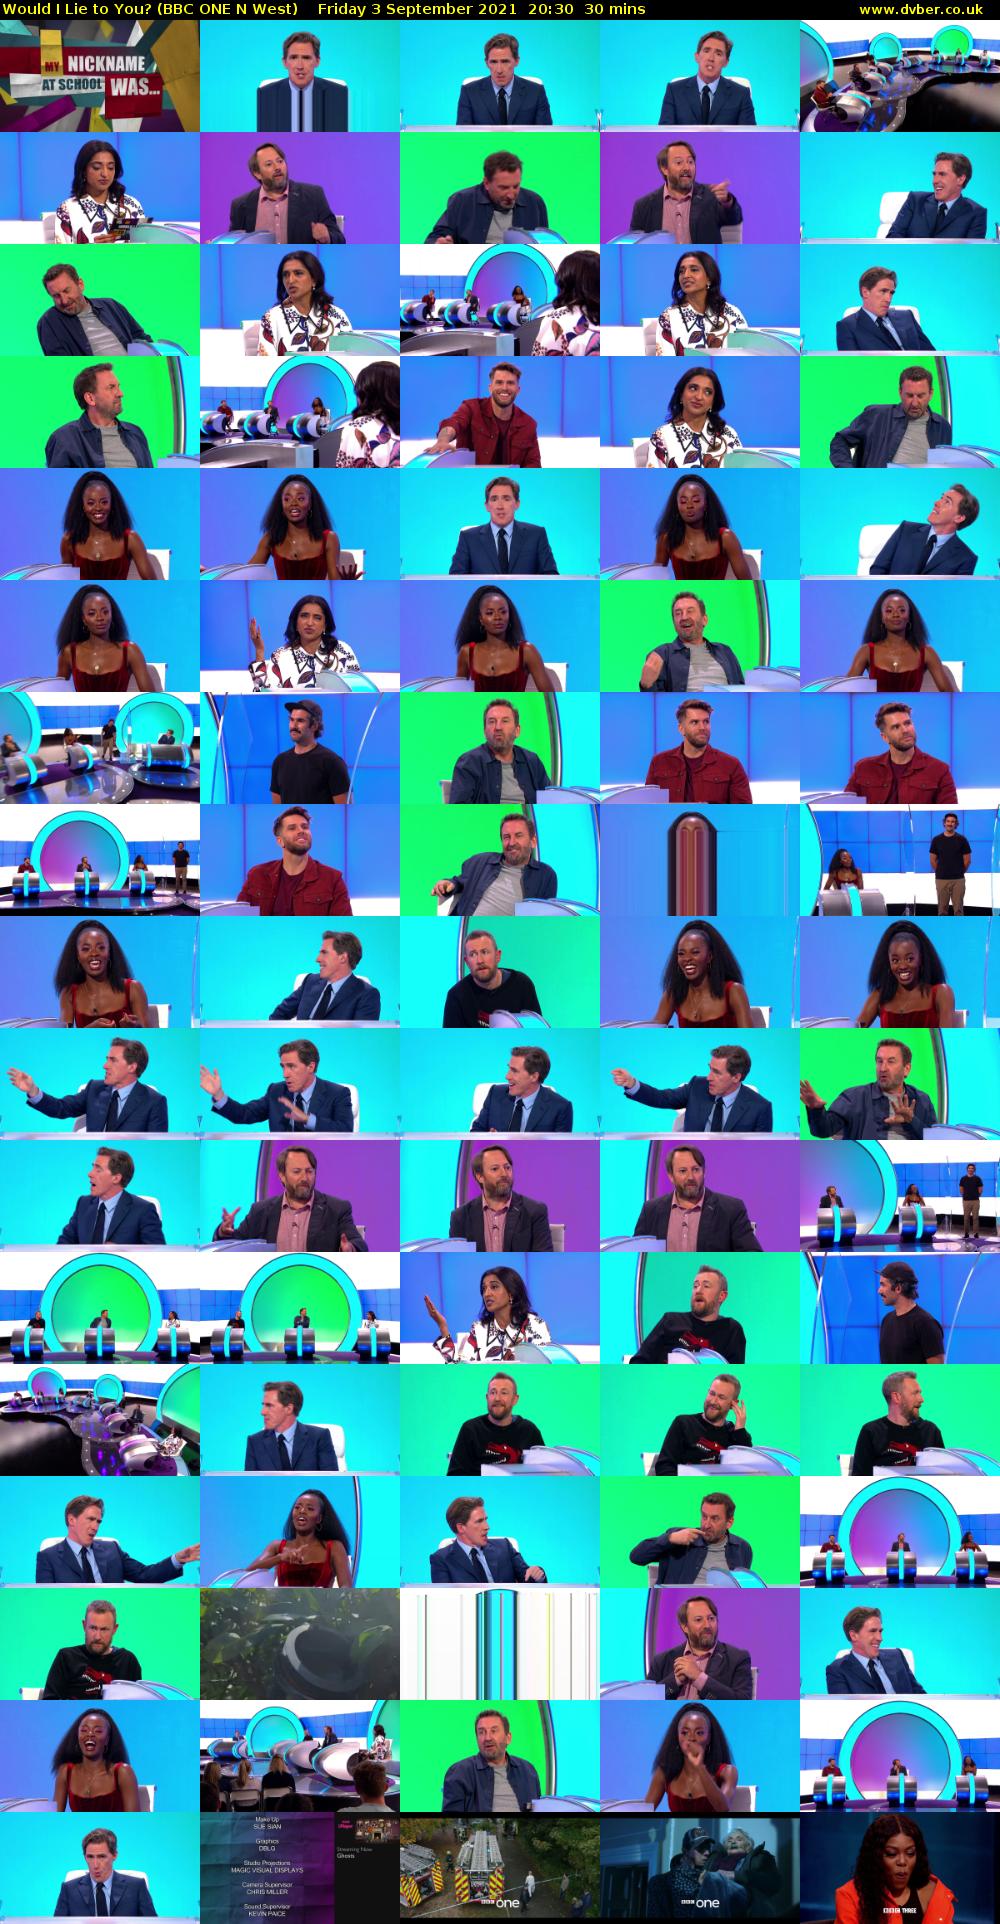 Would I Lie to You? (BBC ONE N West) Friday 3 September 2021 20:30 - 21:00